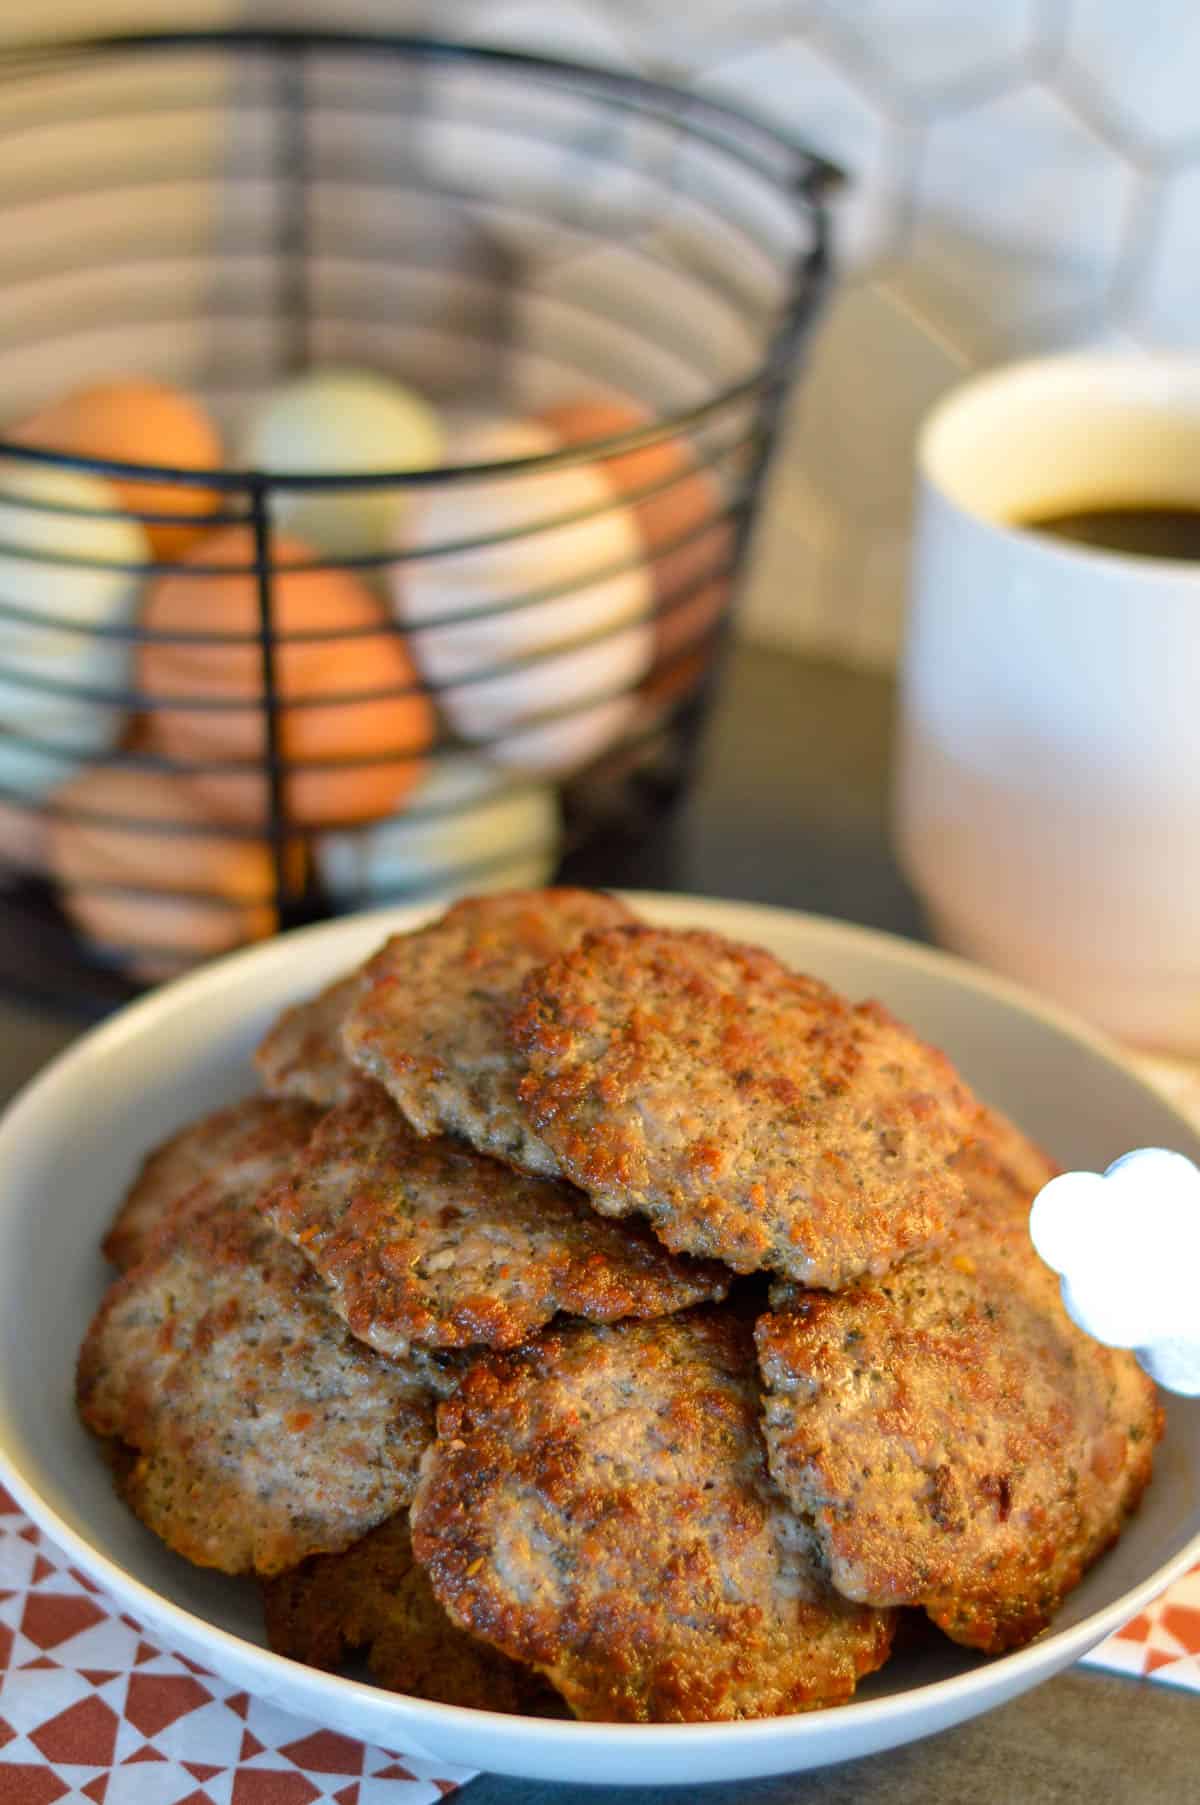 Breakfast Sausage Patties stacked in a white serving bowl over red and white napkin with basket of eggs and coffee cup in background